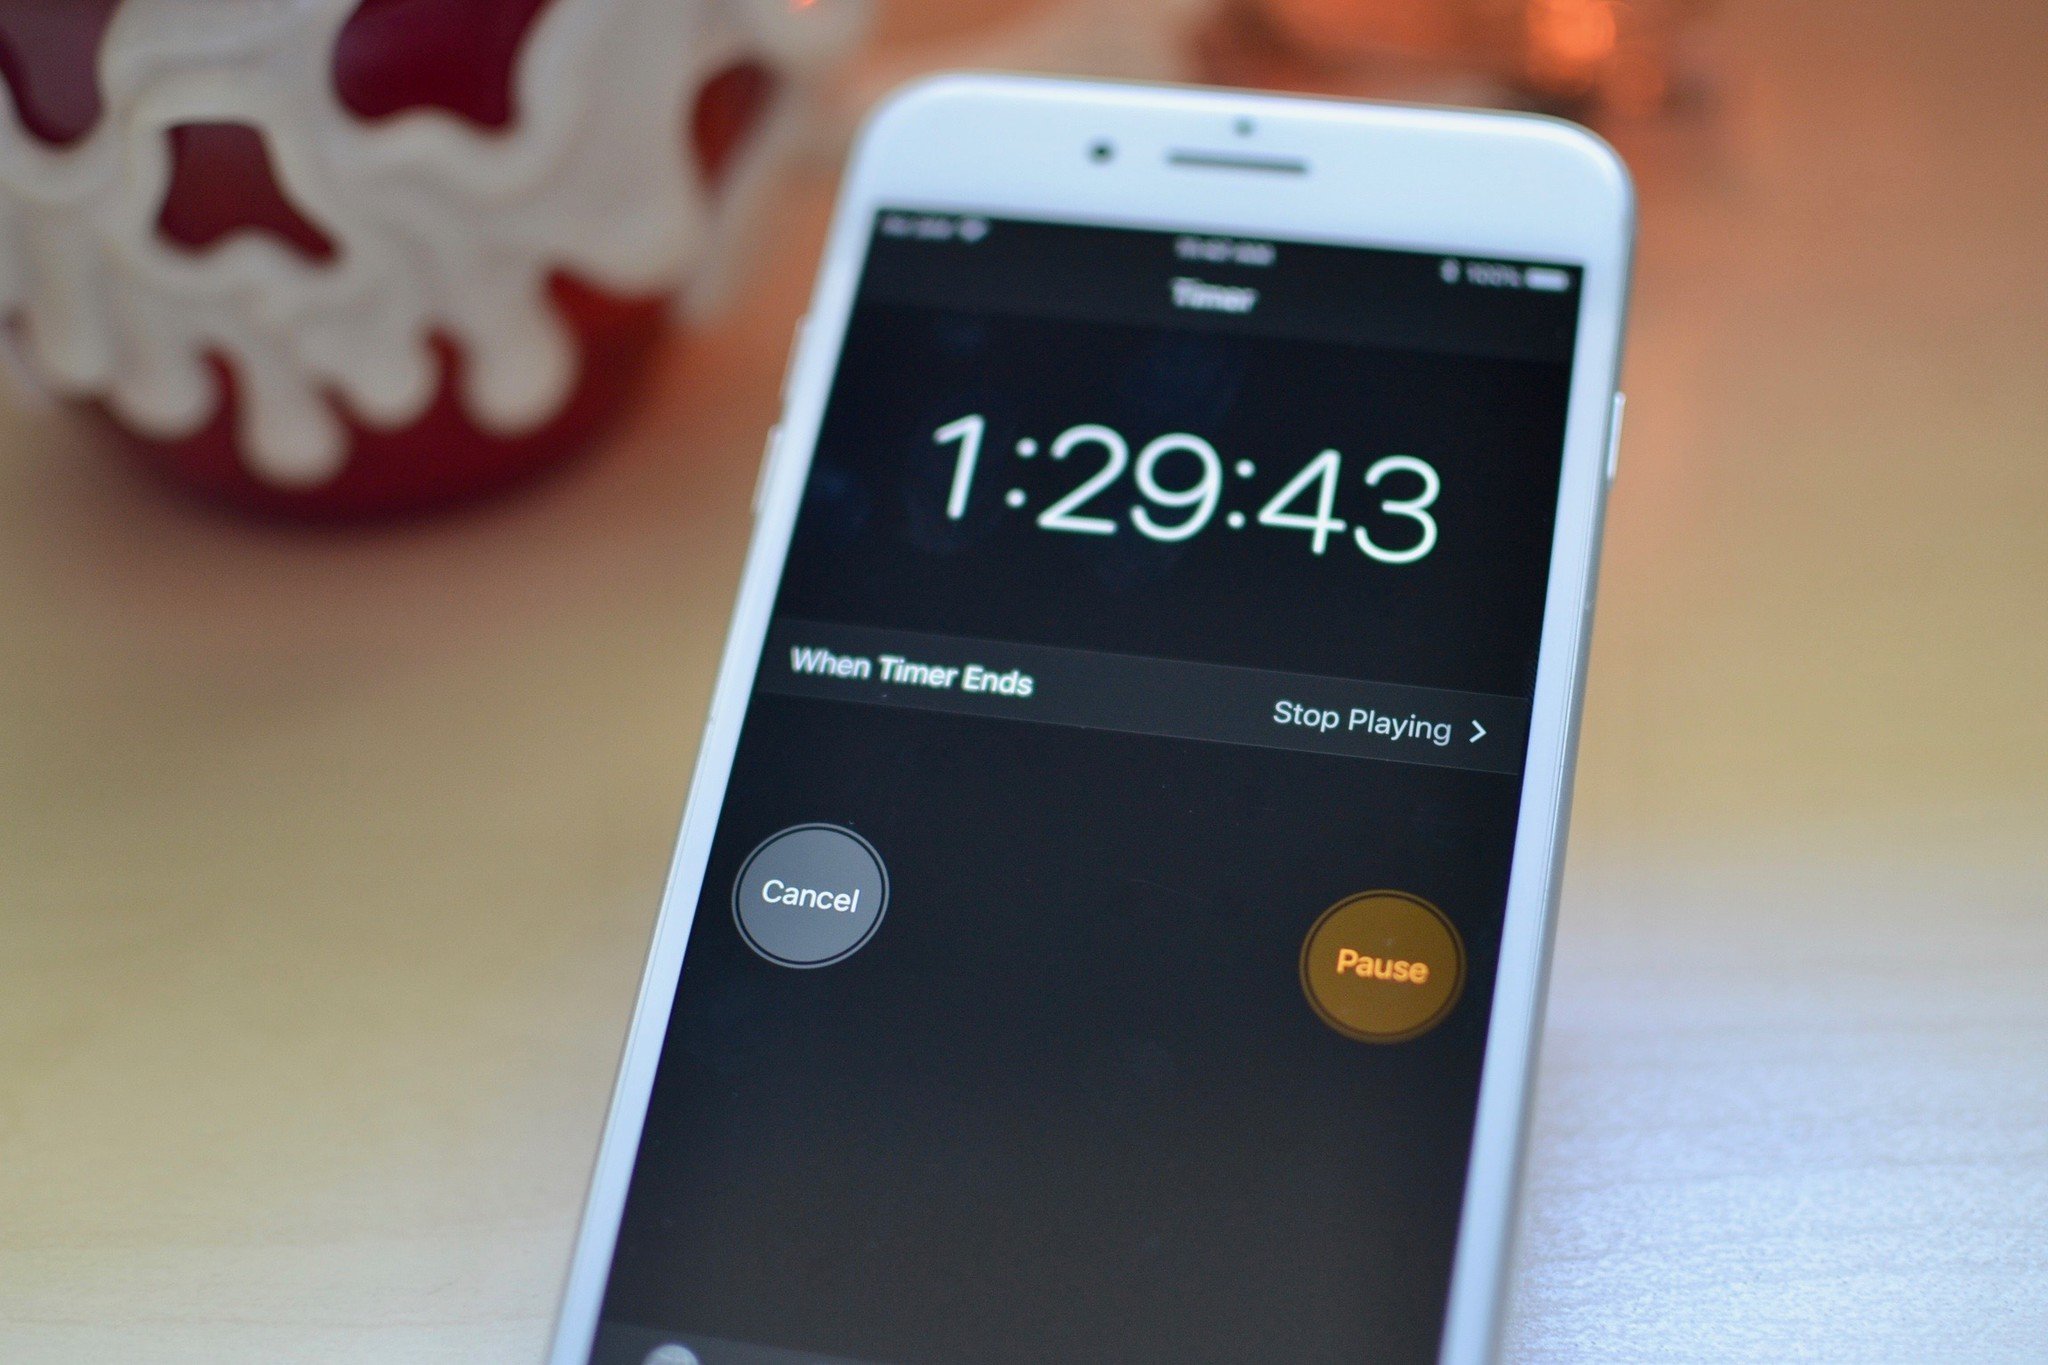 The Timer app on iPhone